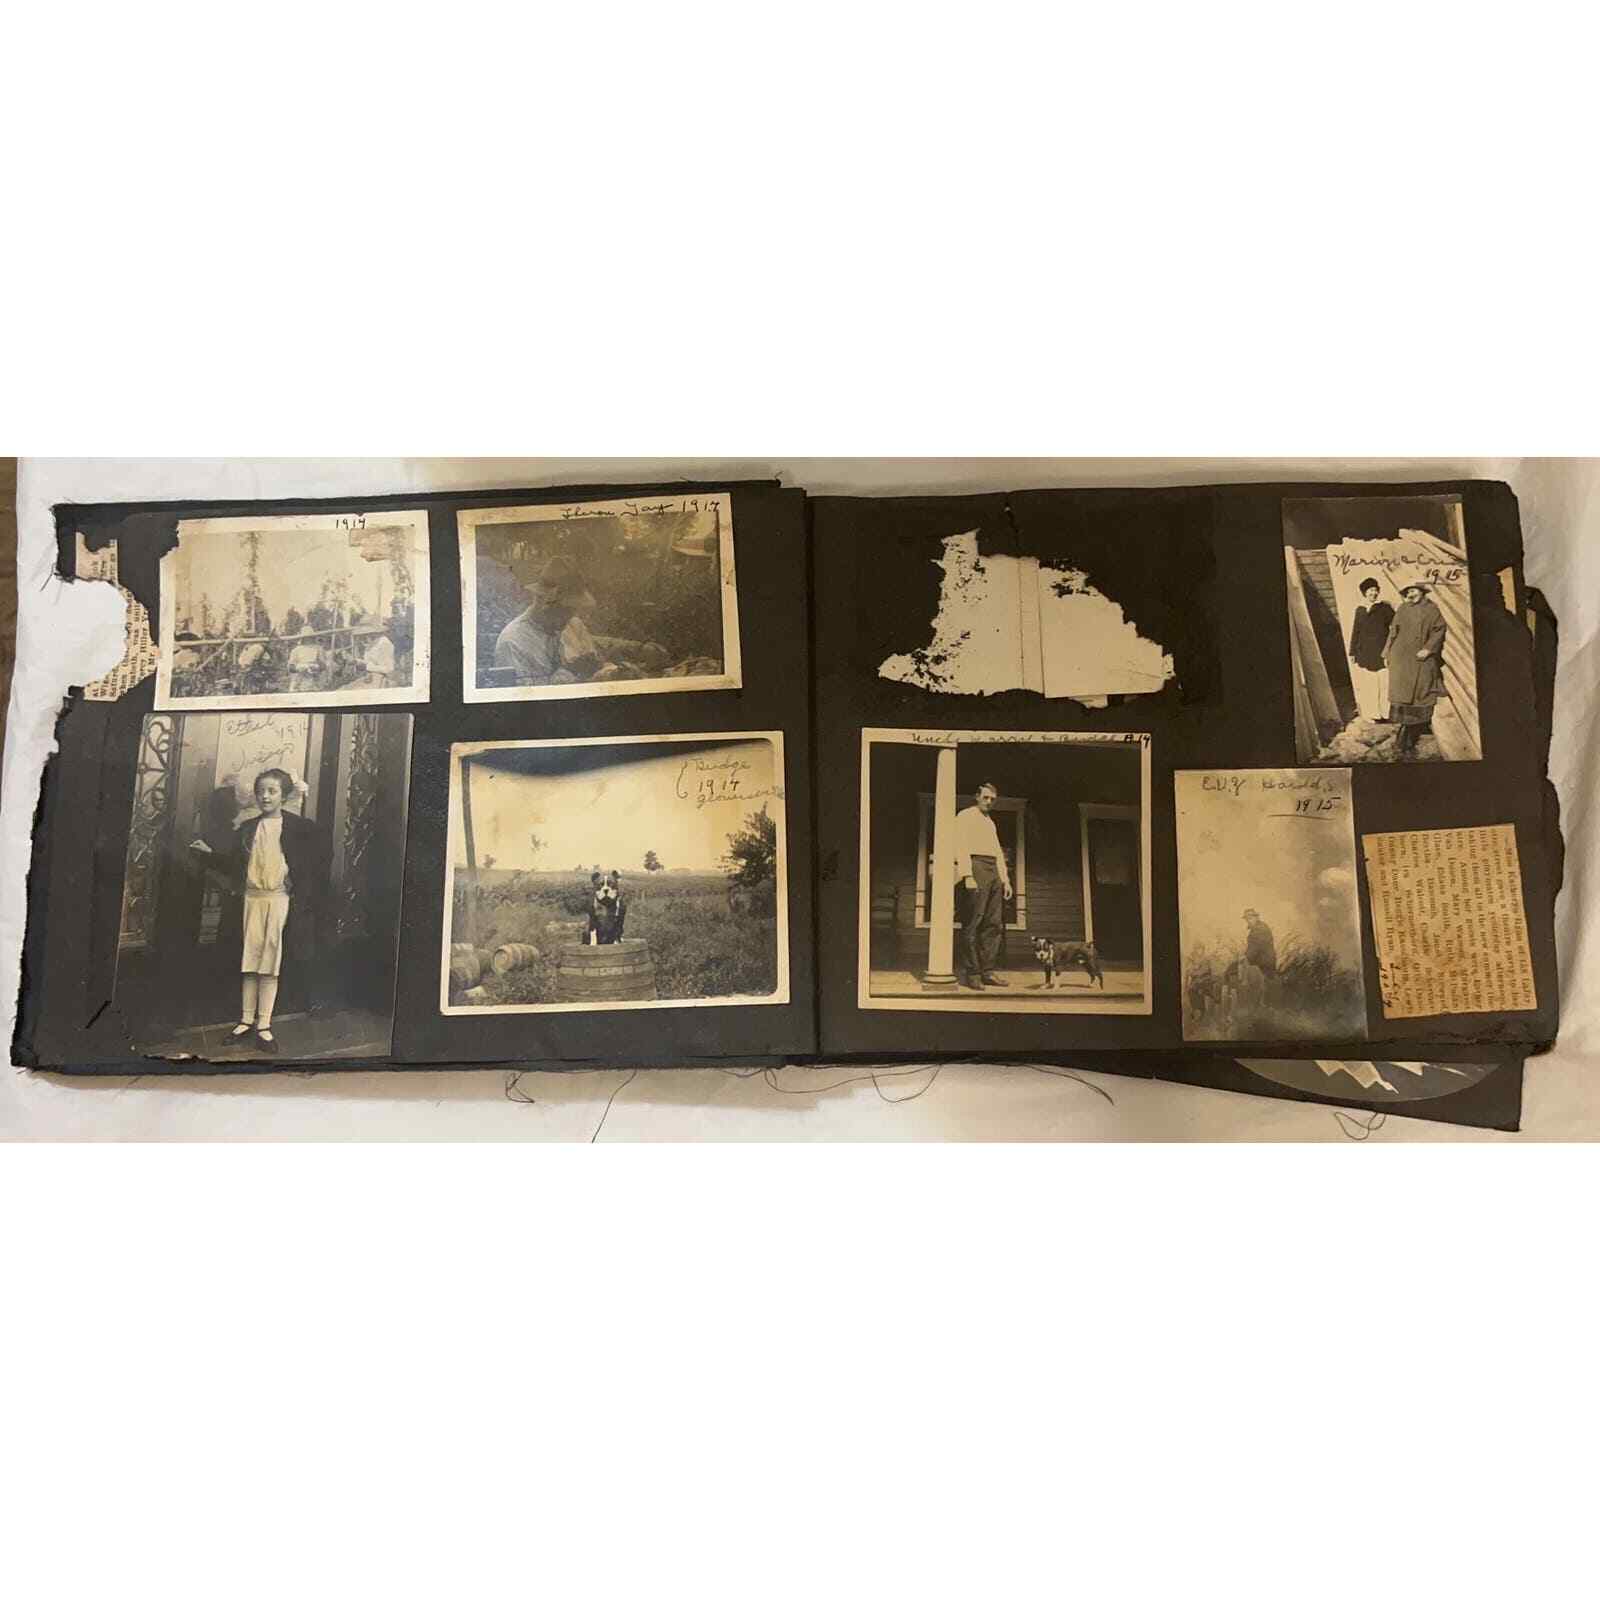 INCREDIBLE Antique Early 1900s Family Photo Album, Photographic Scrapbook